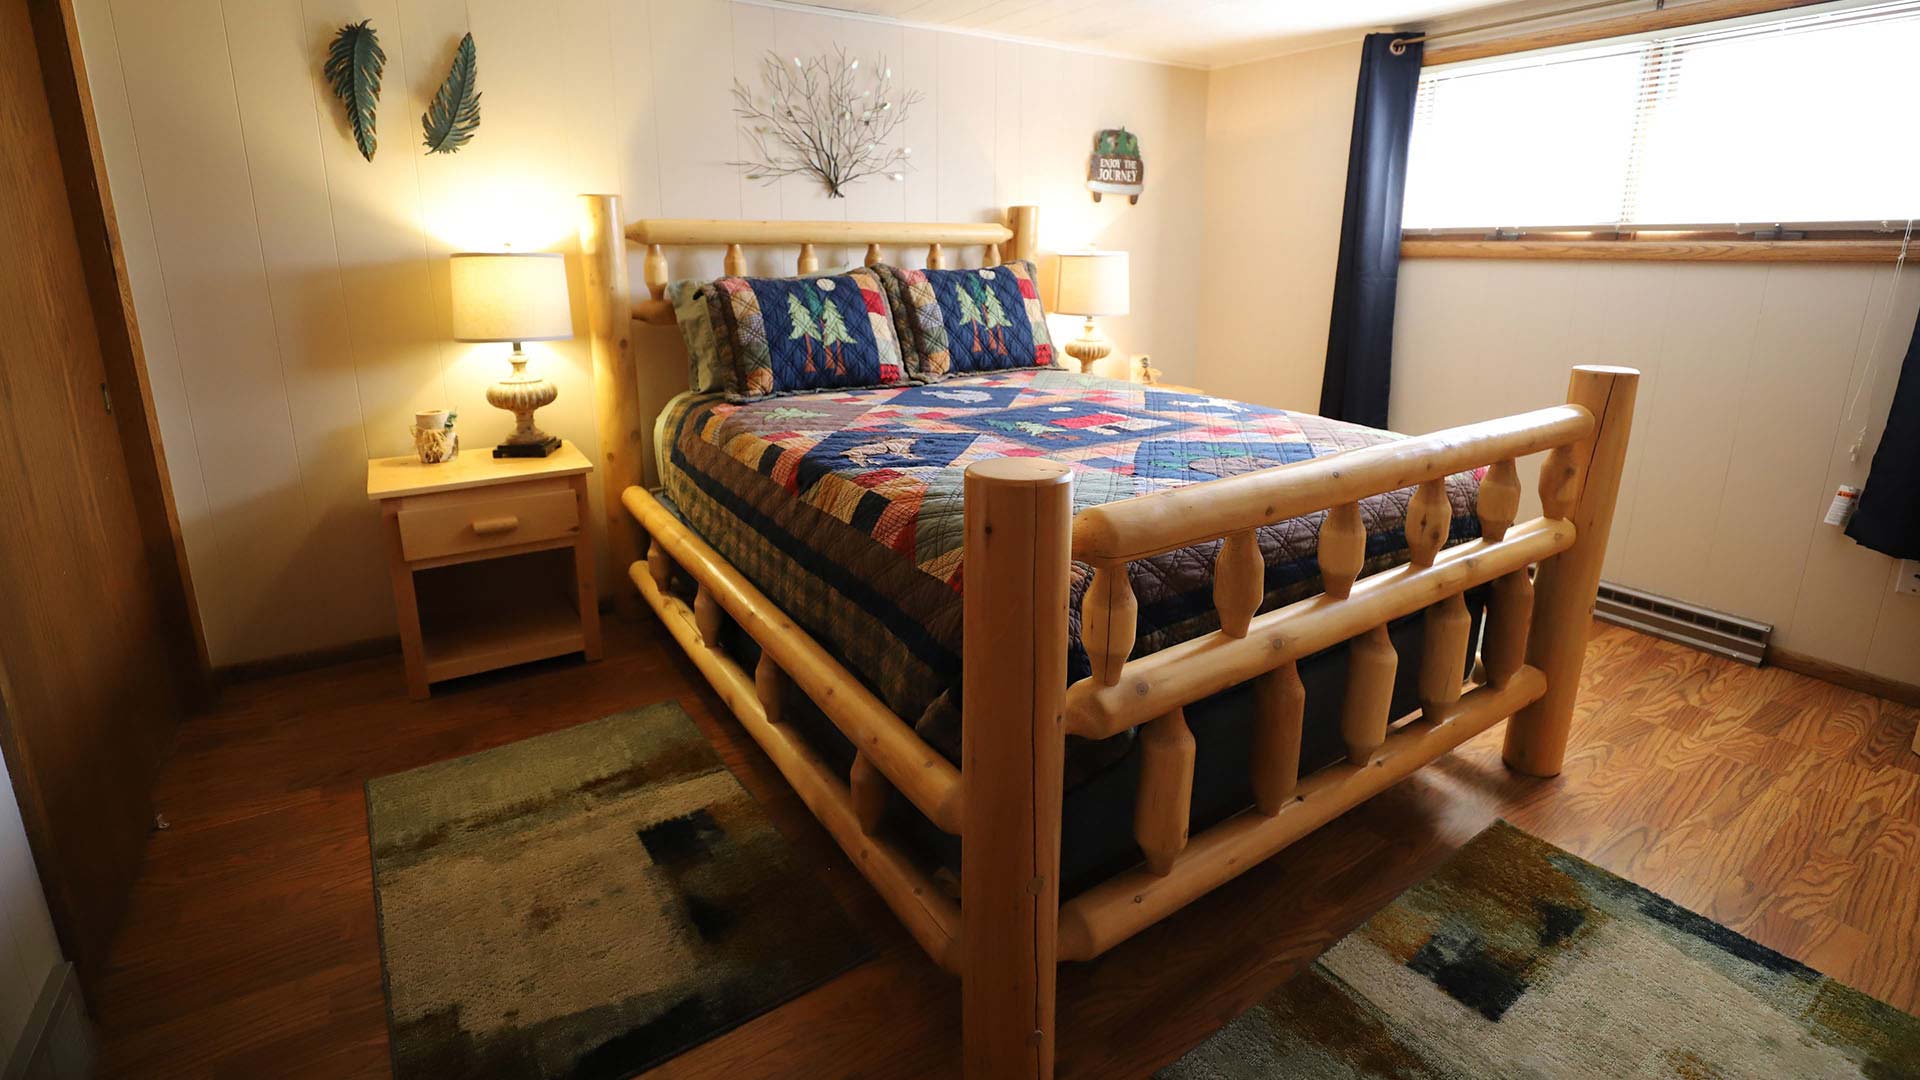 Explore Oneida County This Spring | Bedroom on display at Lake Tomahawk Lodge